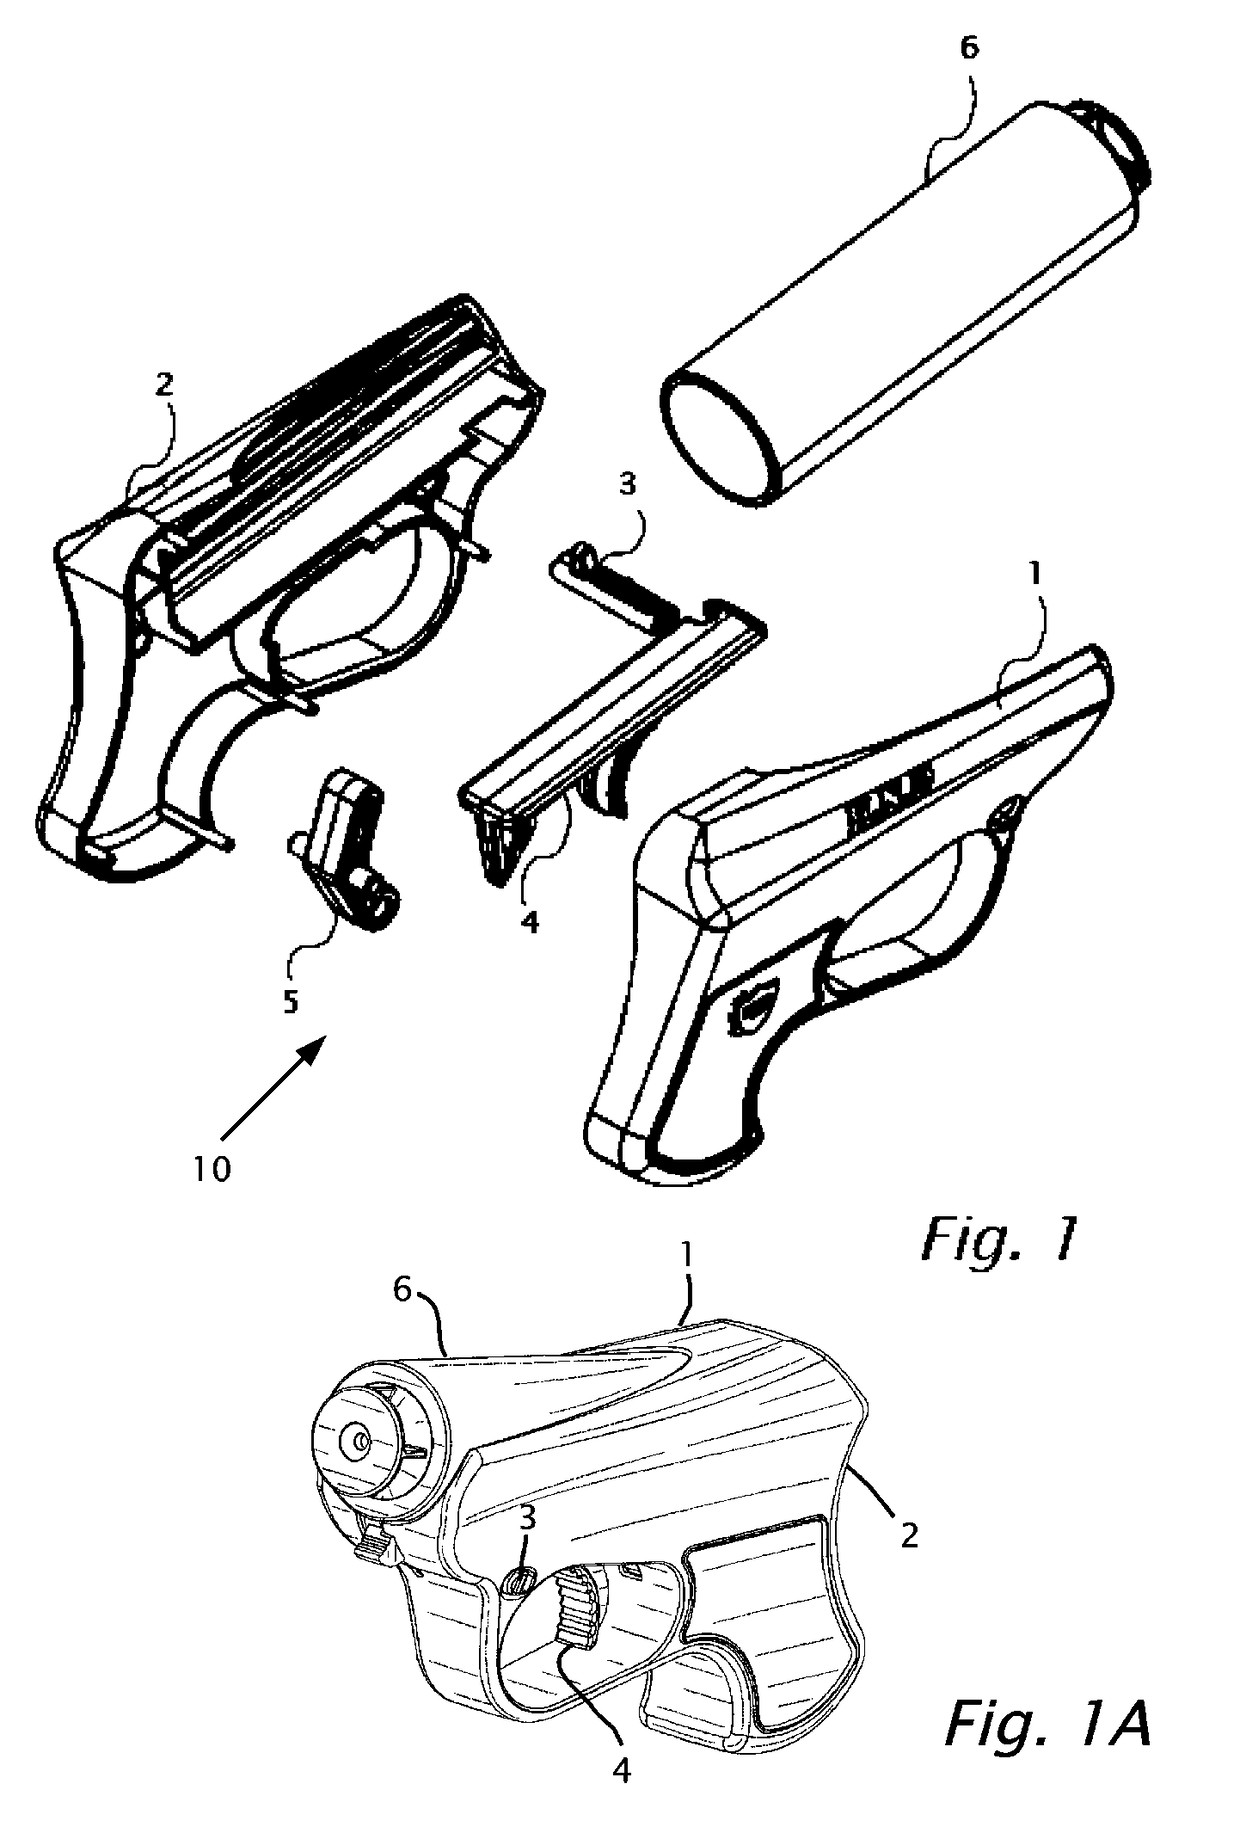 Non-lethal weapon for self-defense